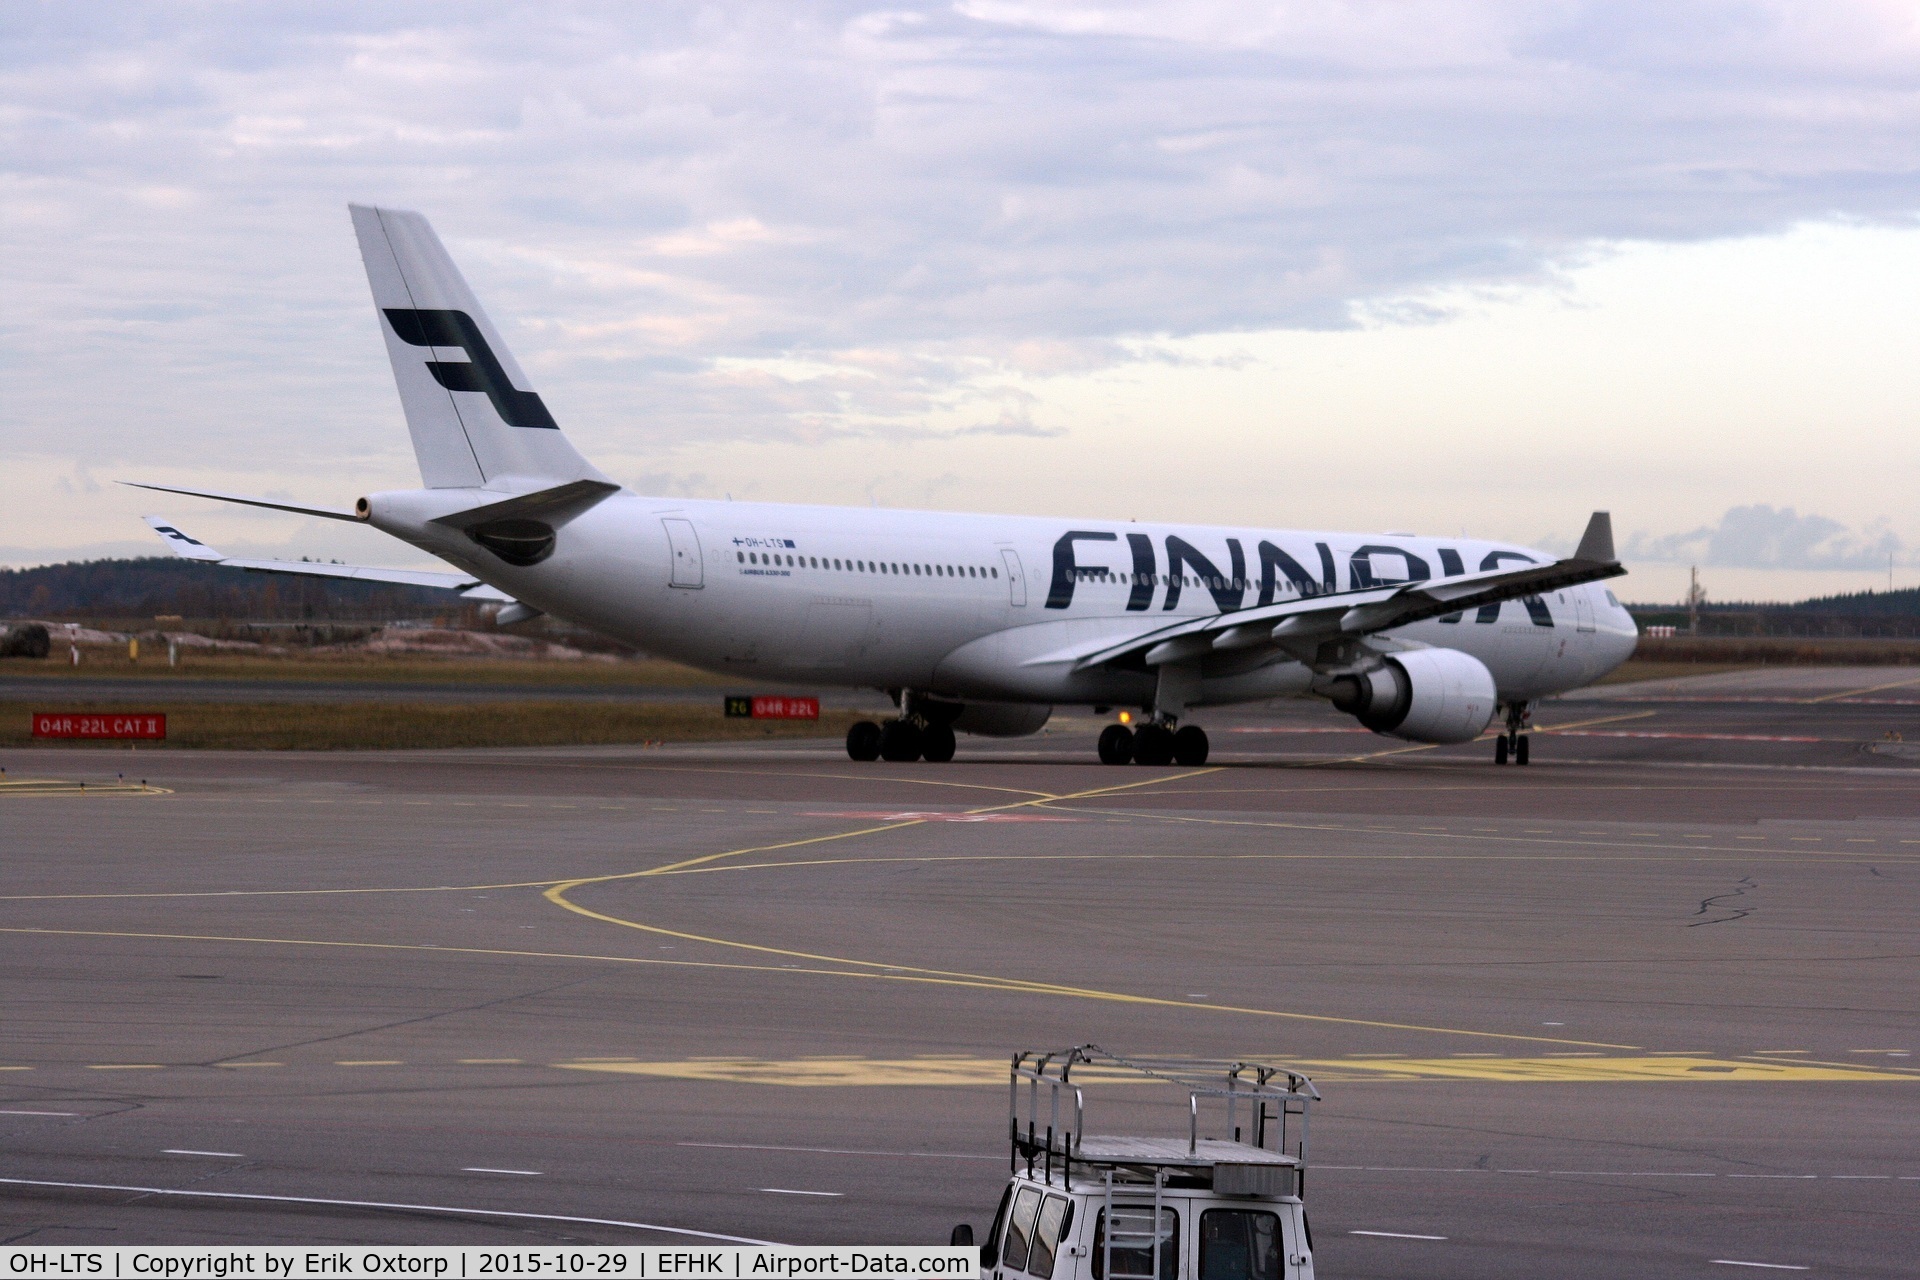 OH-LTS, 2009 Airbus A330-302X C/N 1078, OH-LTS in HEL